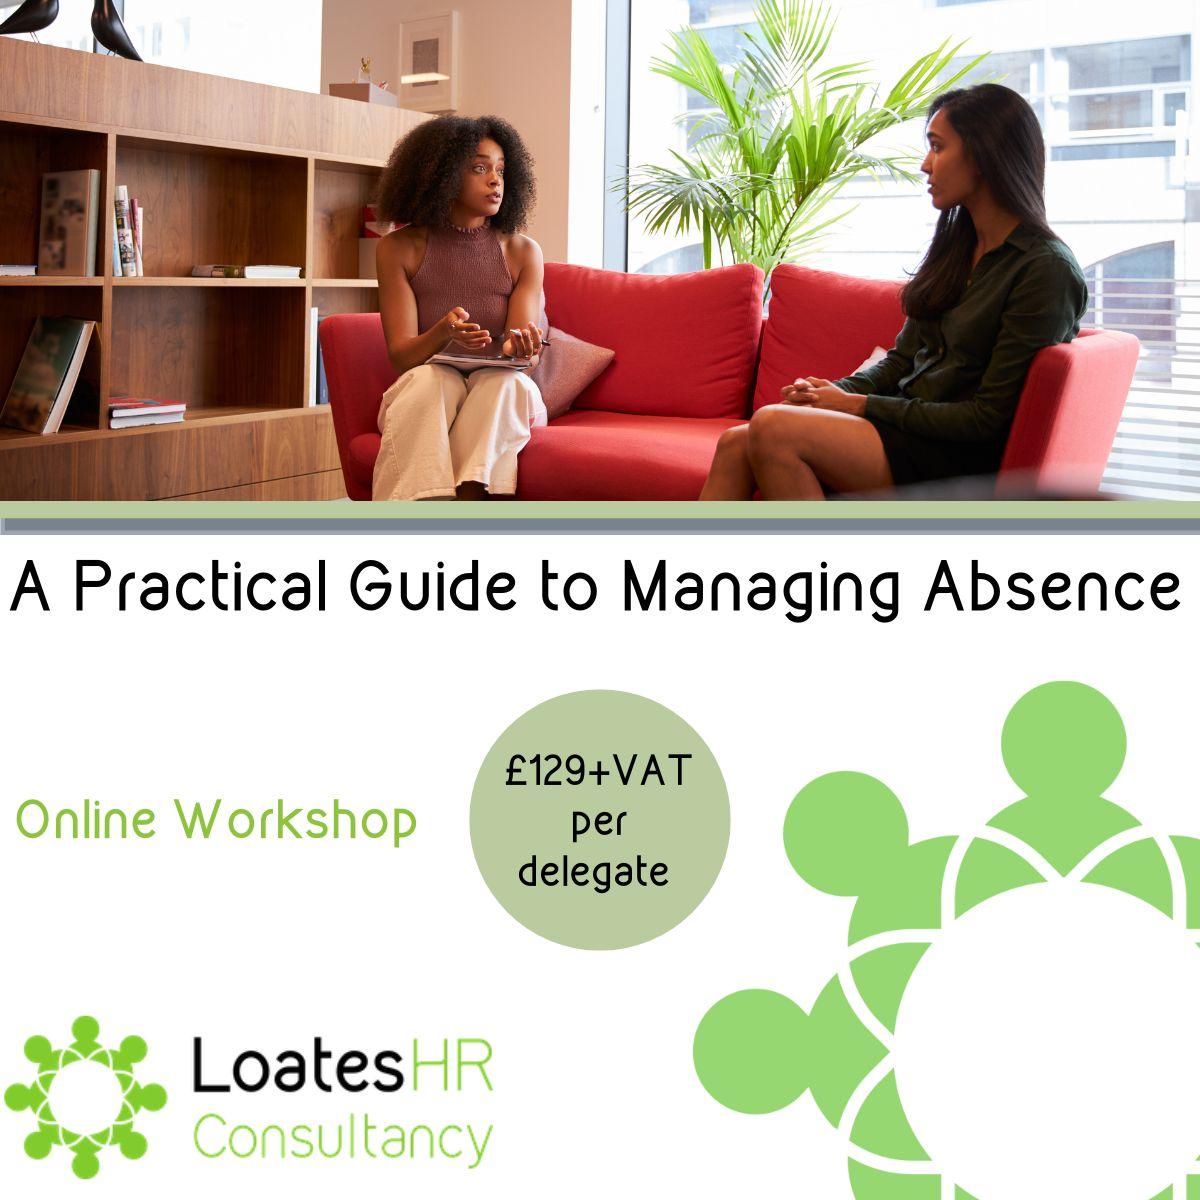 Don't miss out on our upcoming training course 'A Practical Guide to Managing Absence' taking place online on Wed 3 May 2023. Gain the skills you need to manage complex cases of employee absences. 🤝👩‍💻 #HR #AbsenceManagement #TrainingCourse bit.ly/3jlMcCS